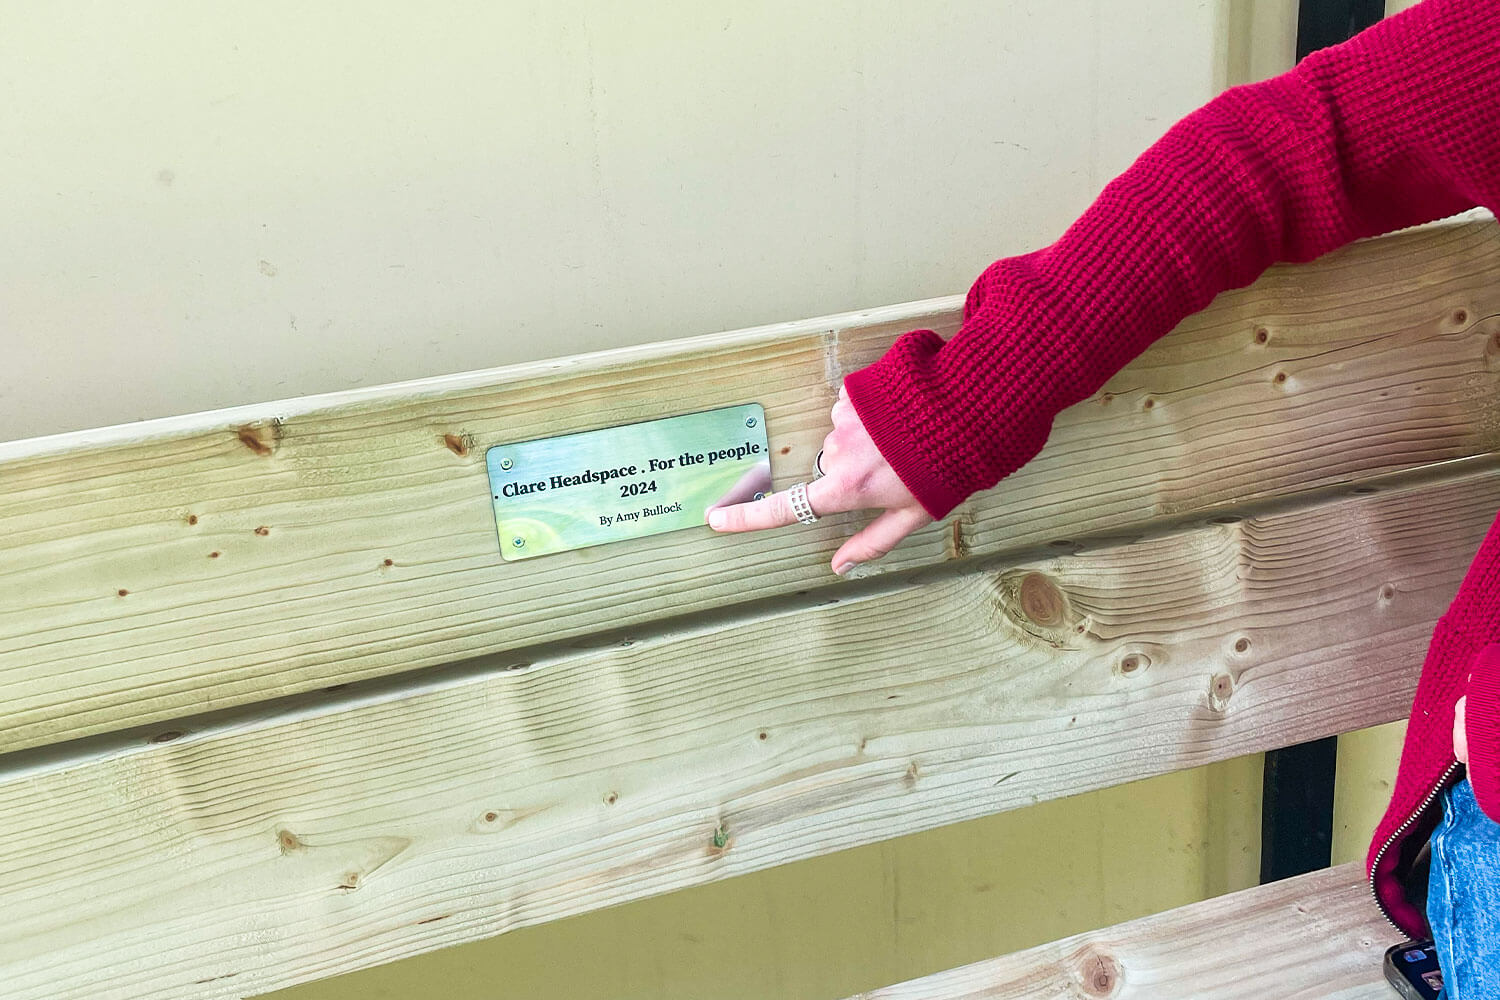 A wooden bench with a finger pointing at a plaque in the centre